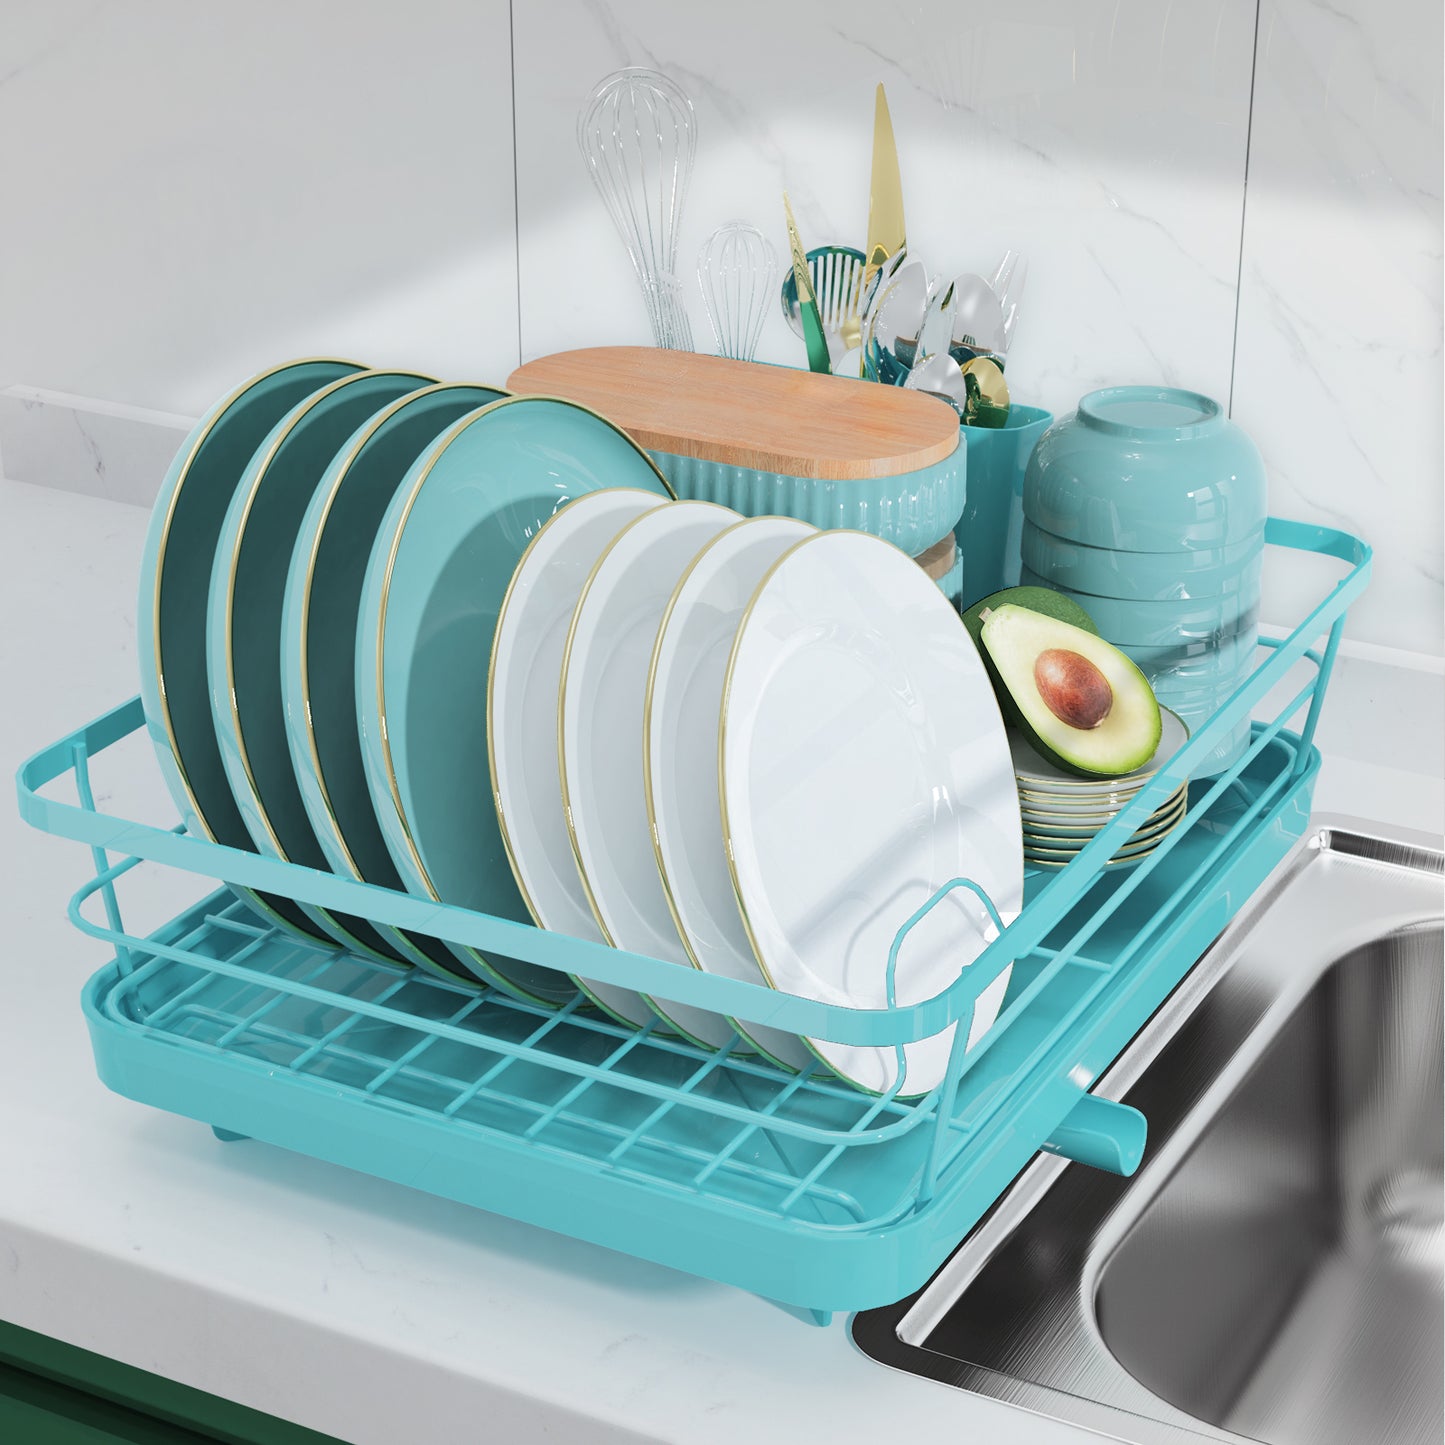 Sakugi Dish Drying Rack - Compact Dish Rack for Kitchen Counter with a Cutlery Holder, Durable Stainless Steel Kitchen Dish Rack for Various Tableware, Dish Drying Rack with Easy Installation,Blue